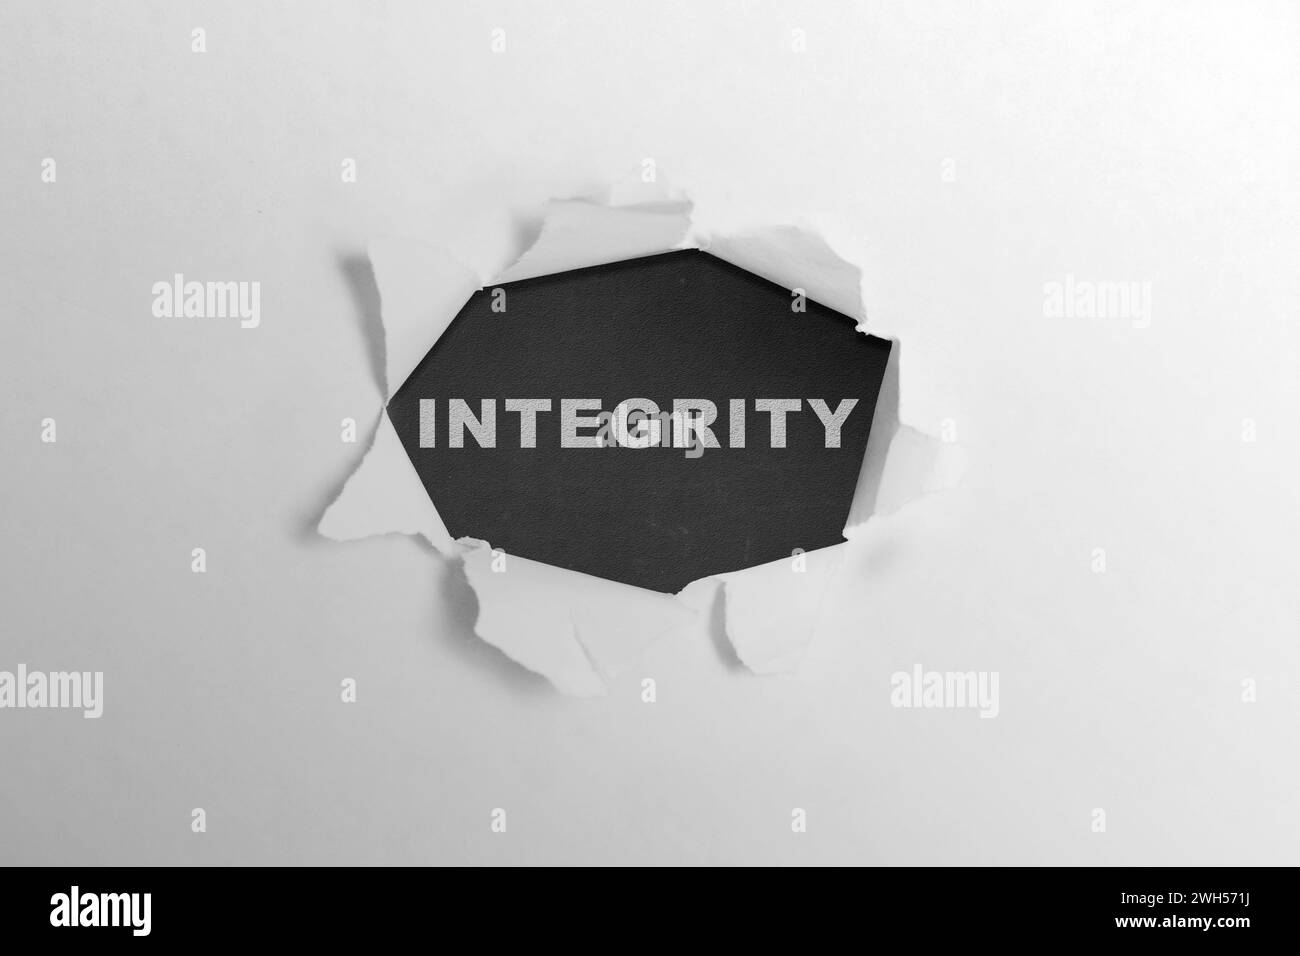 Ripped paper with integrity text on a black background. Reputation integrity concept Stock Photo